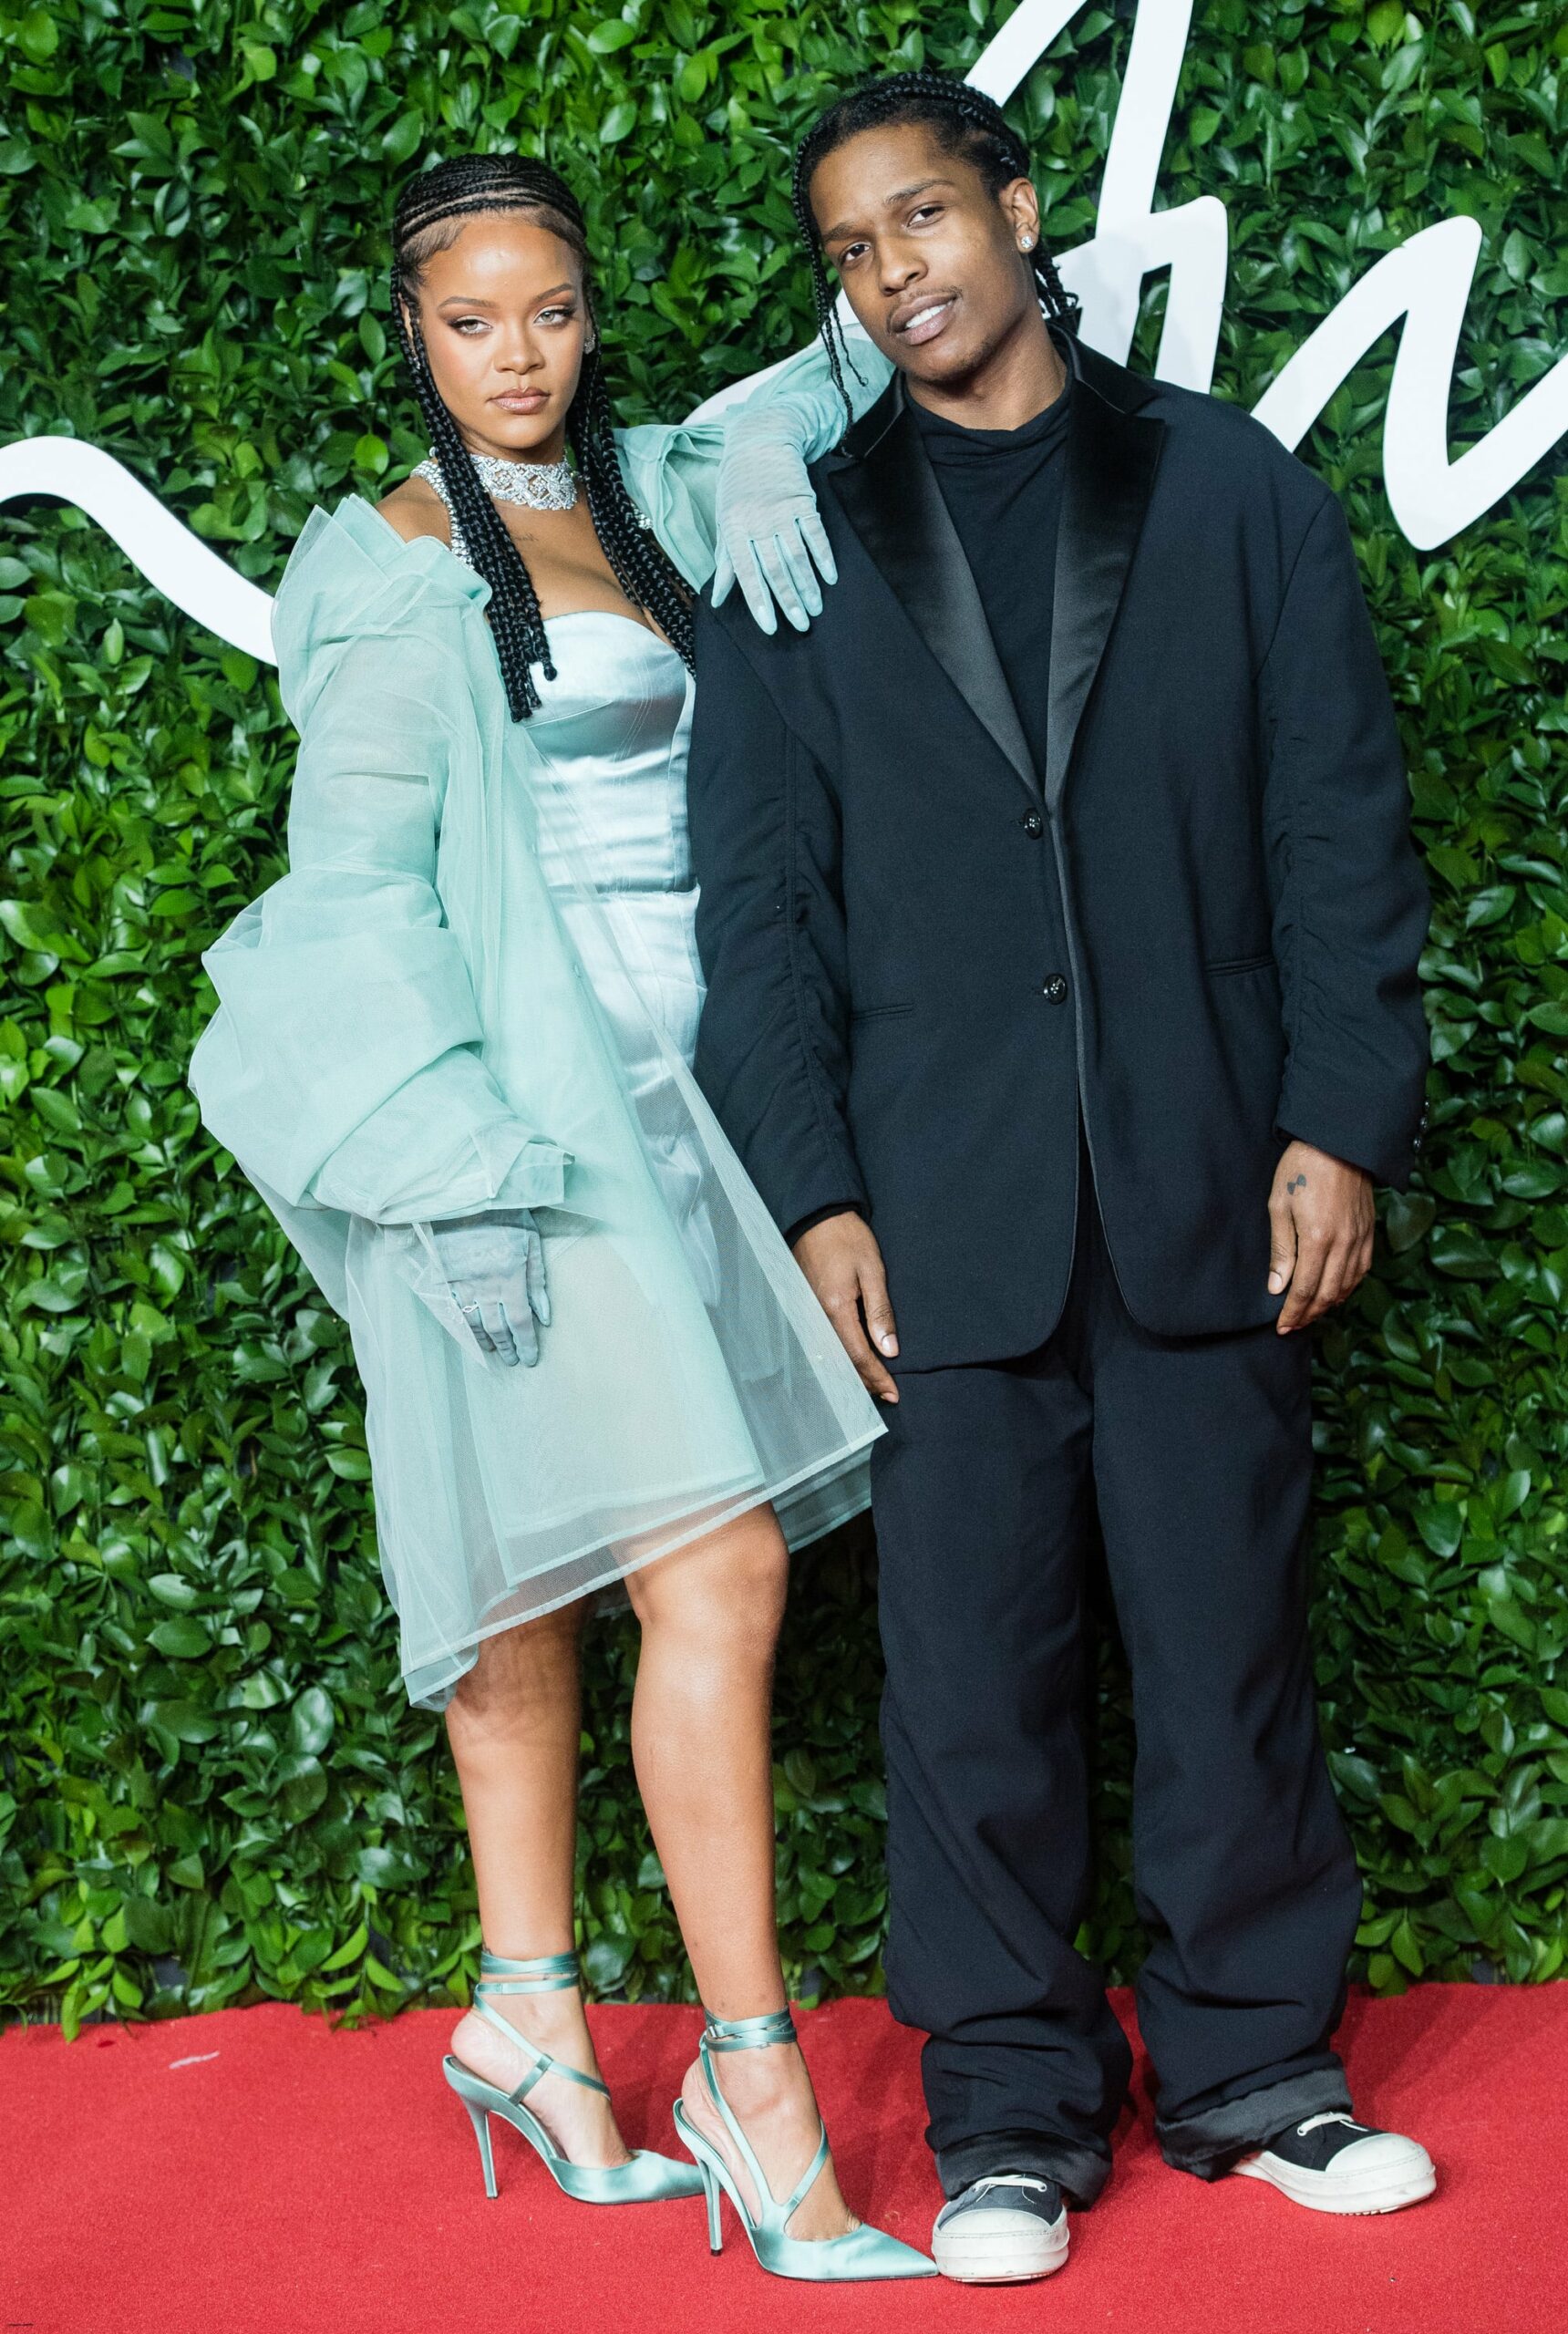 LONDON, ENGLAND - DECEMBER 02:  Rihanna and ASAP Rocky arrive at The Fashion Awards 2019 held at Royal Albert Hall on December 02, 2019 in London, England. (Photo by Samir Hussein/WireImage)